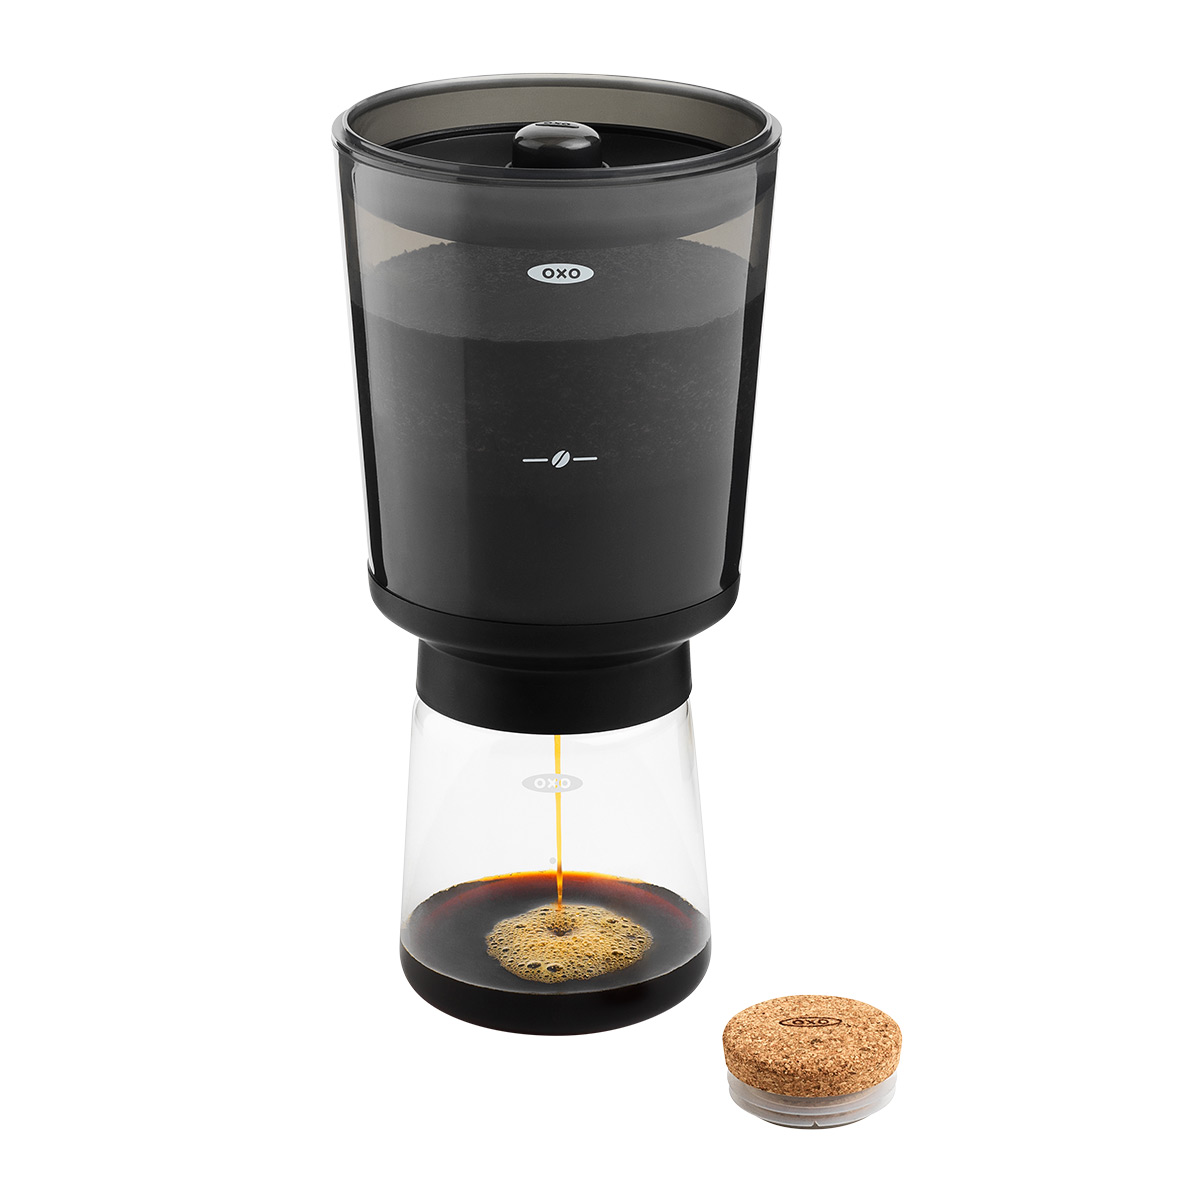 https://www.containerstore.com/catalogimages/427997/10086154-OXO-BREW-Compact-Cold-Brew-.jpg